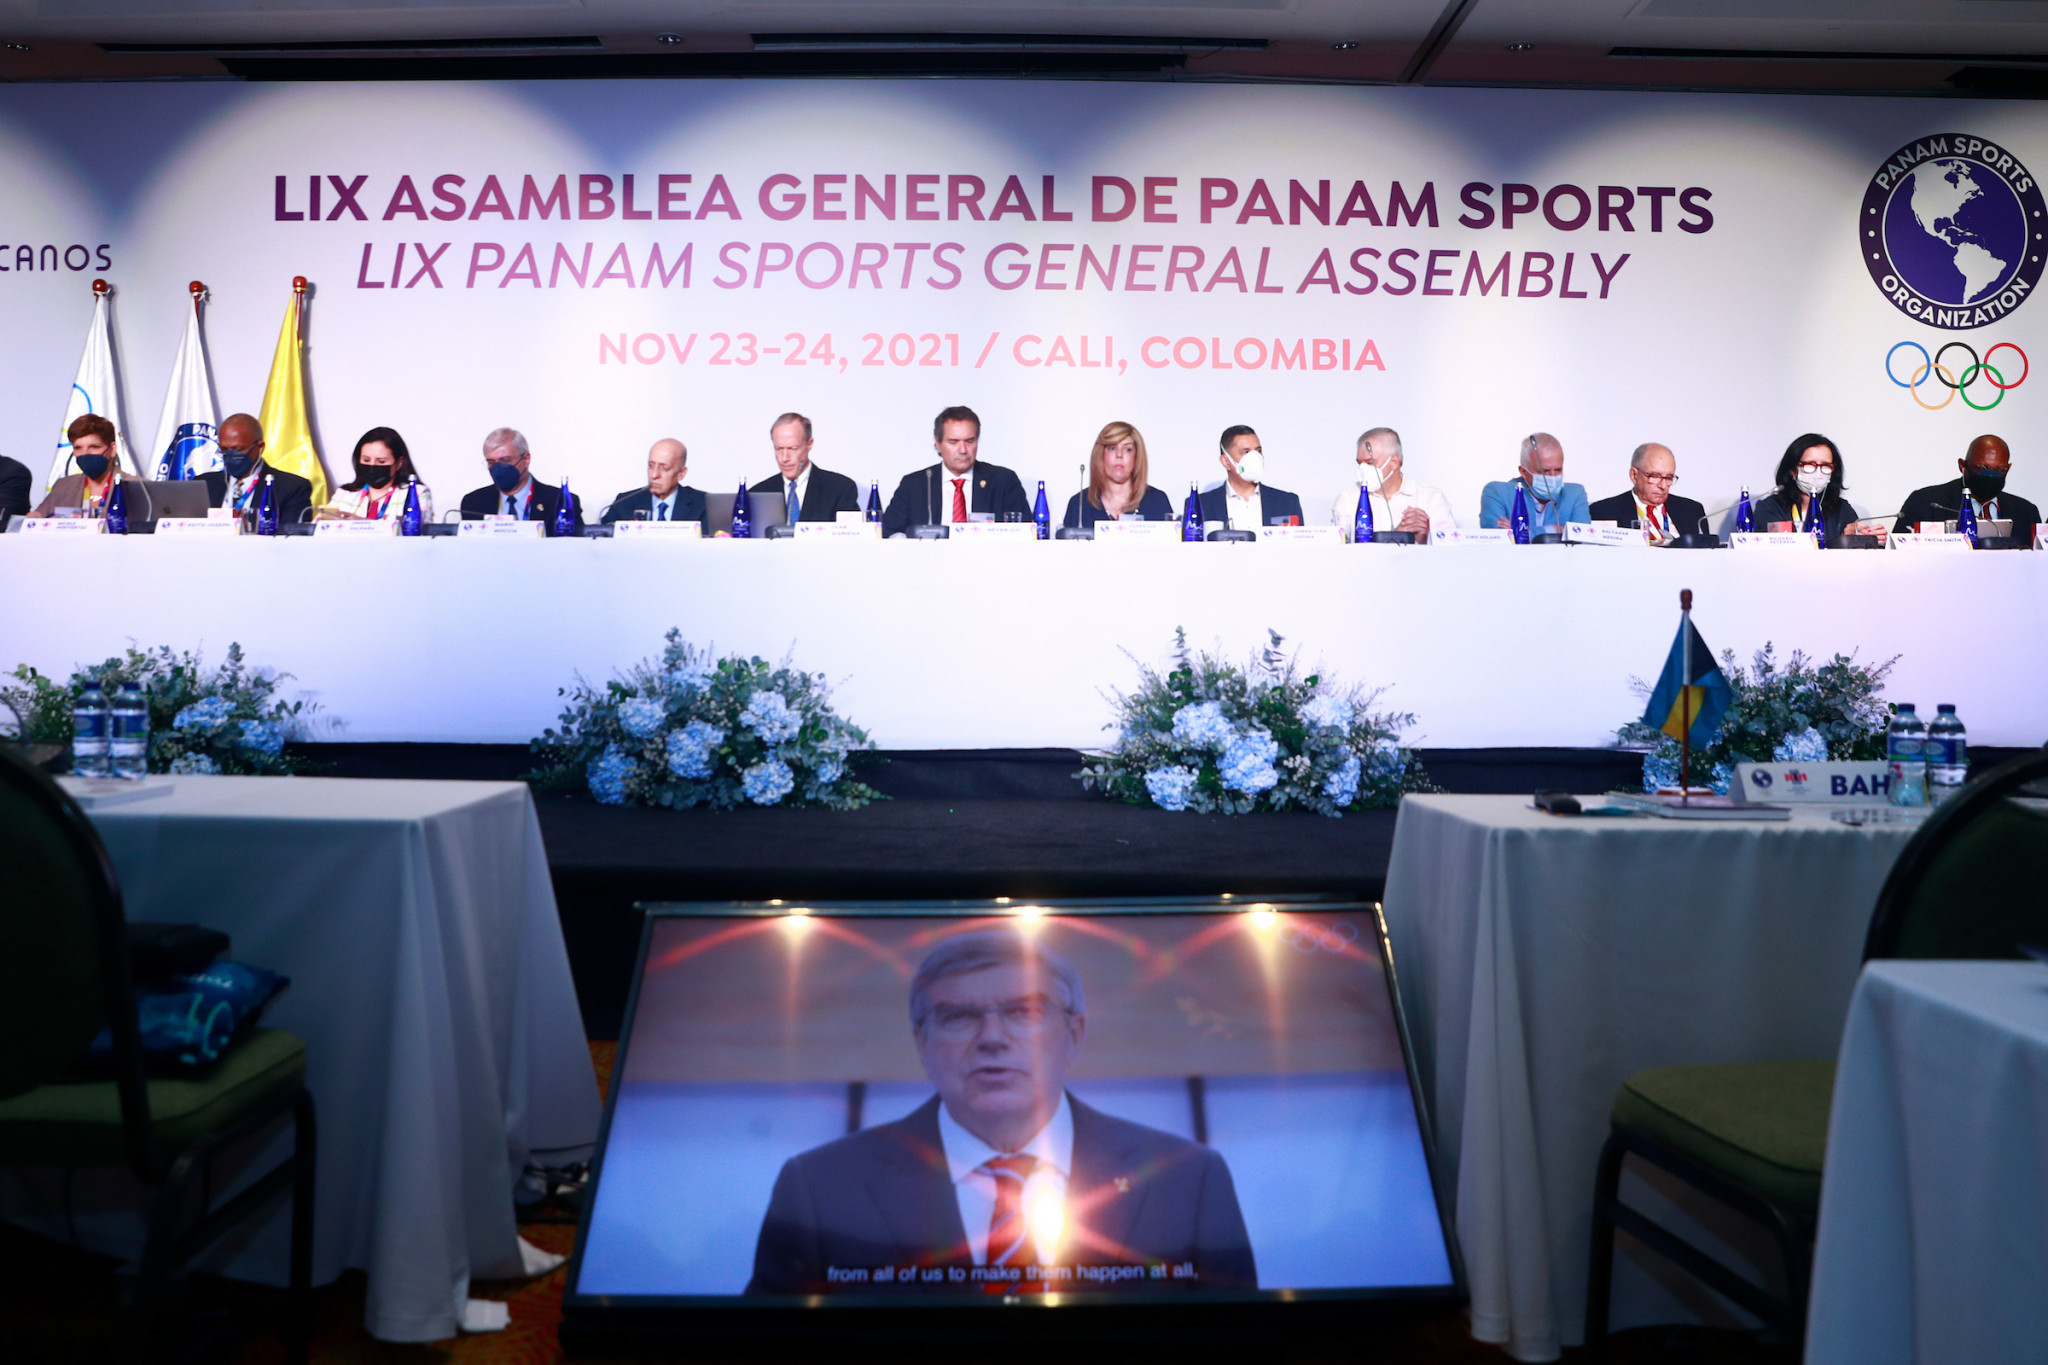 International Olympic Committee President Thomas Bach spoke to the General Assembly via a pre-recorded message ©Agencia.XpressMedia